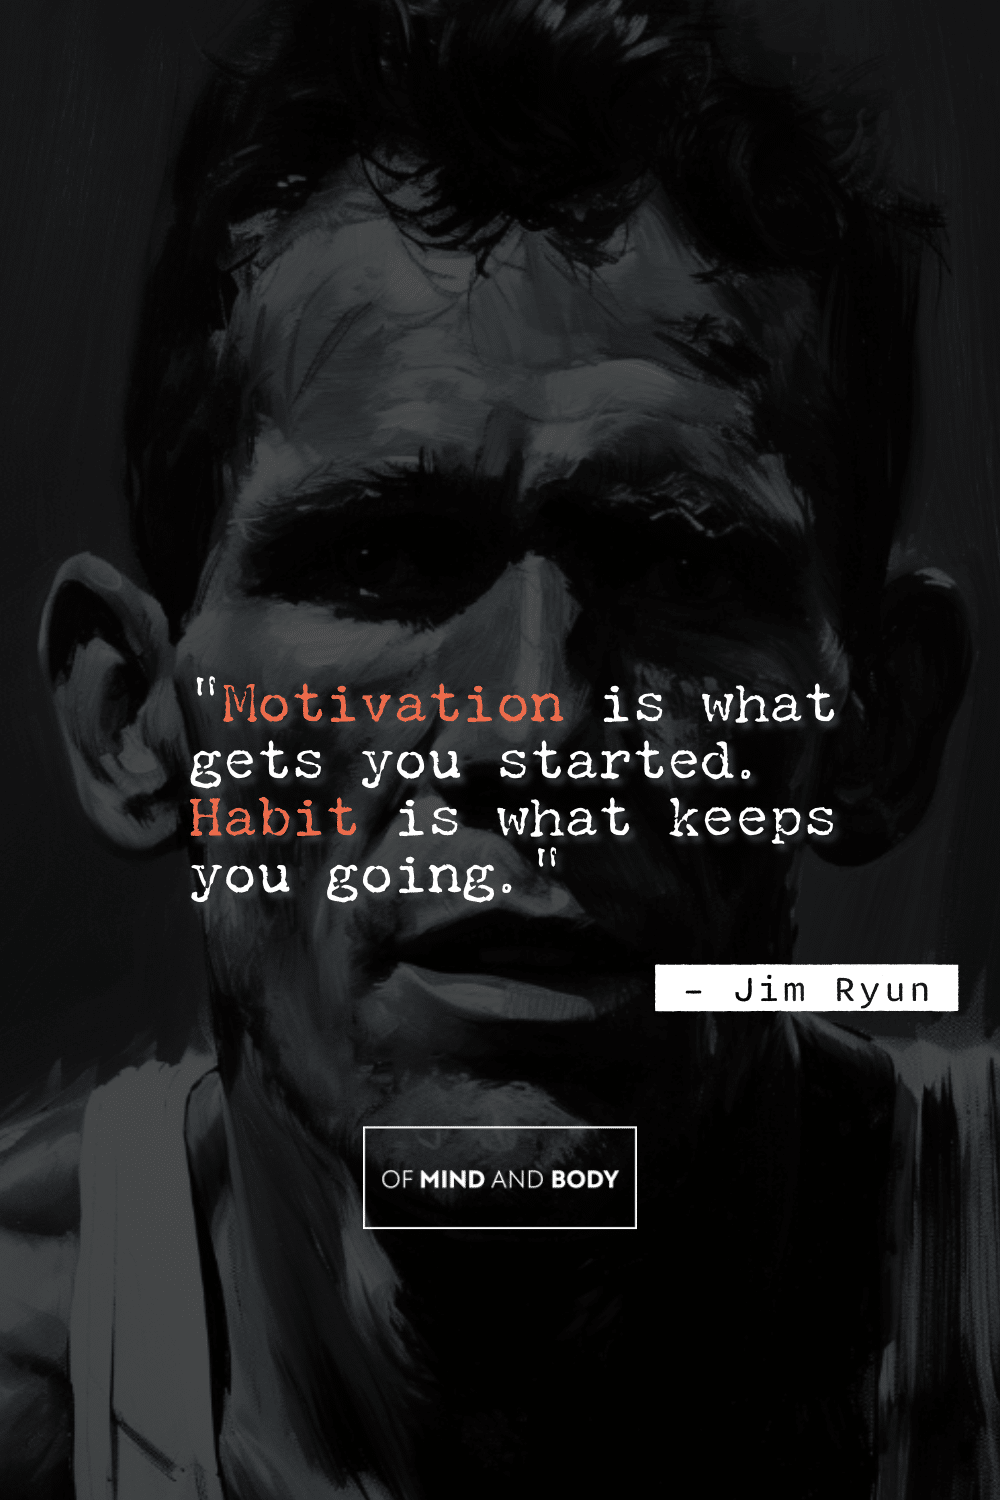 Quotes on Self Improvement - "Motivation is what gets you started. Habit is what keeps you going."